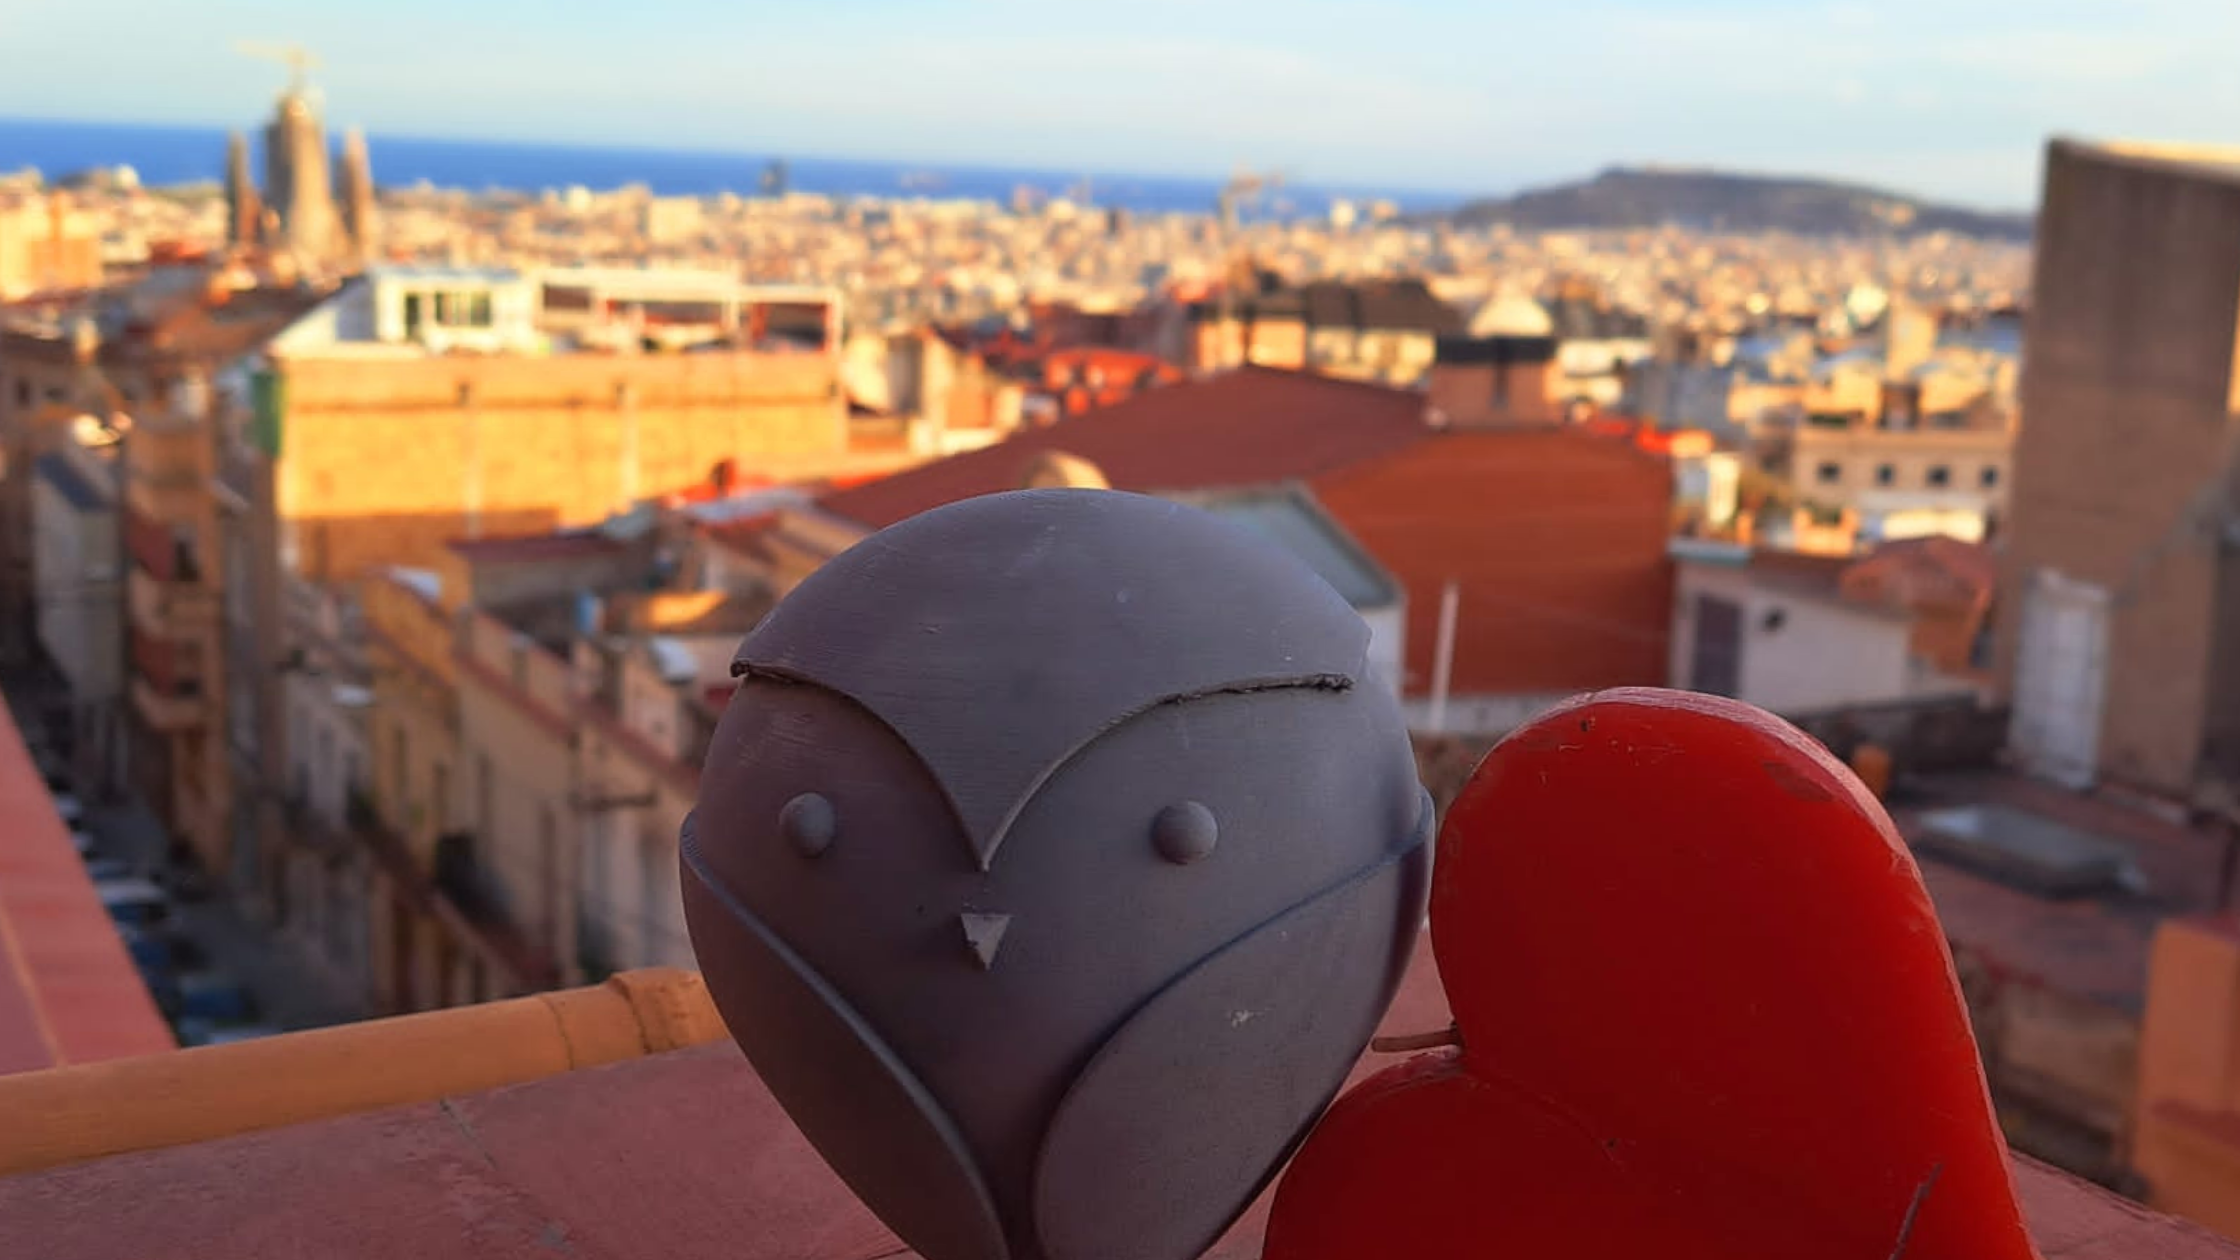 Bam with a red heart overlooking Barcelona with Sagrada Familia in the background.